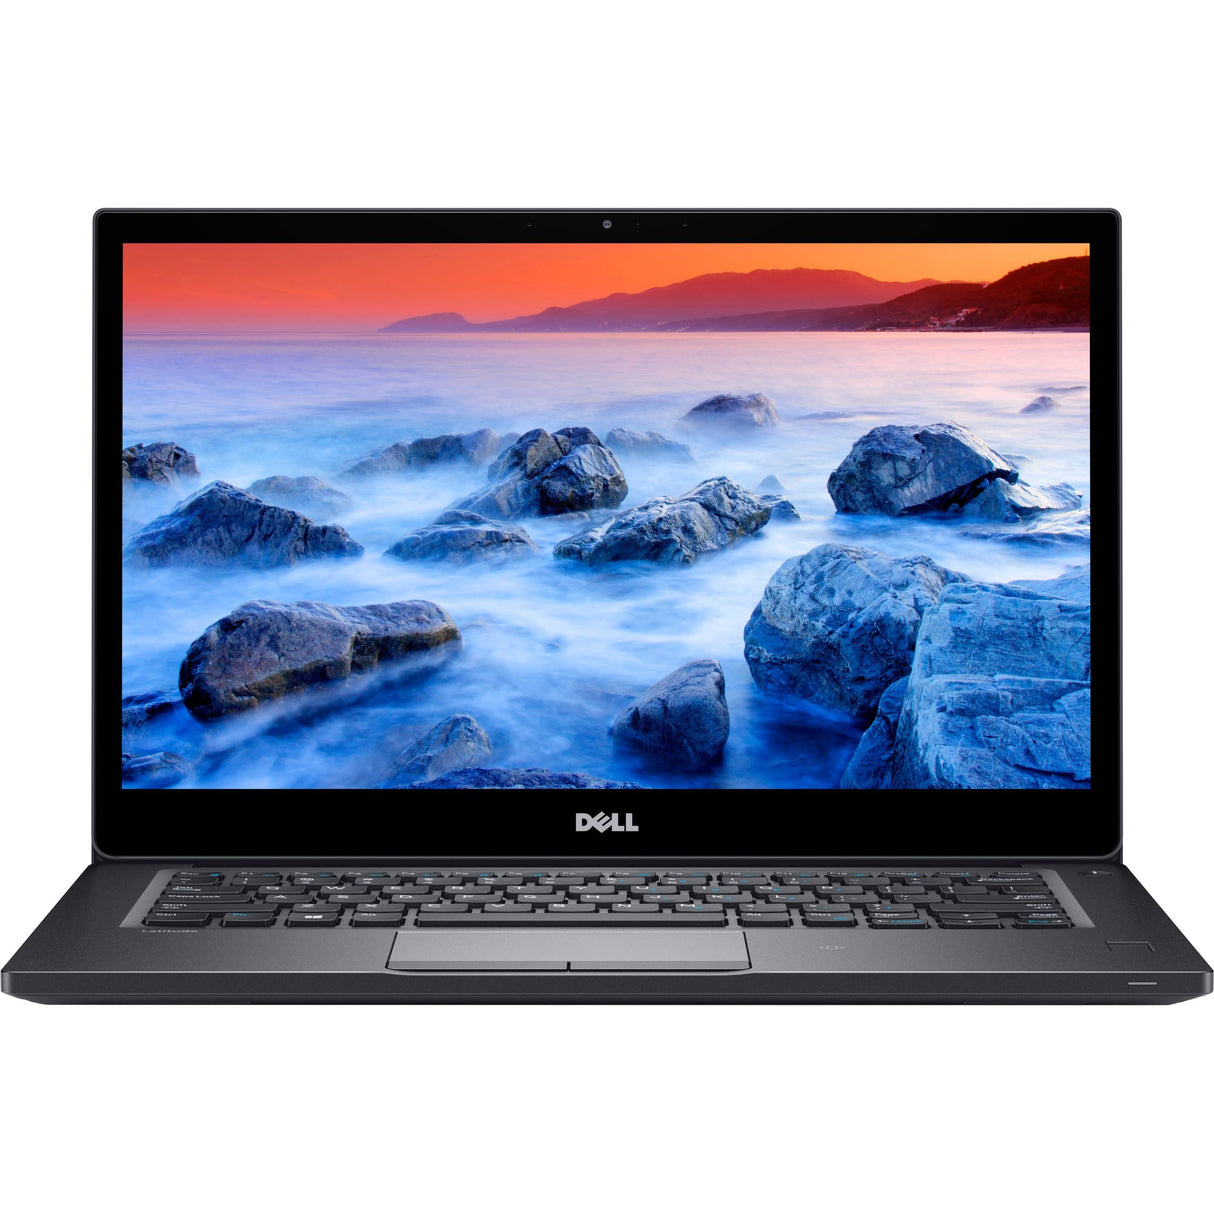 Dell Latitude e7480 14 Inches Laptop  – Core i5 7200U @2.70GHz – 16 GB RAM – 256/512 GB SSD with Windows 10 and MS Office 2016 (Renewed))